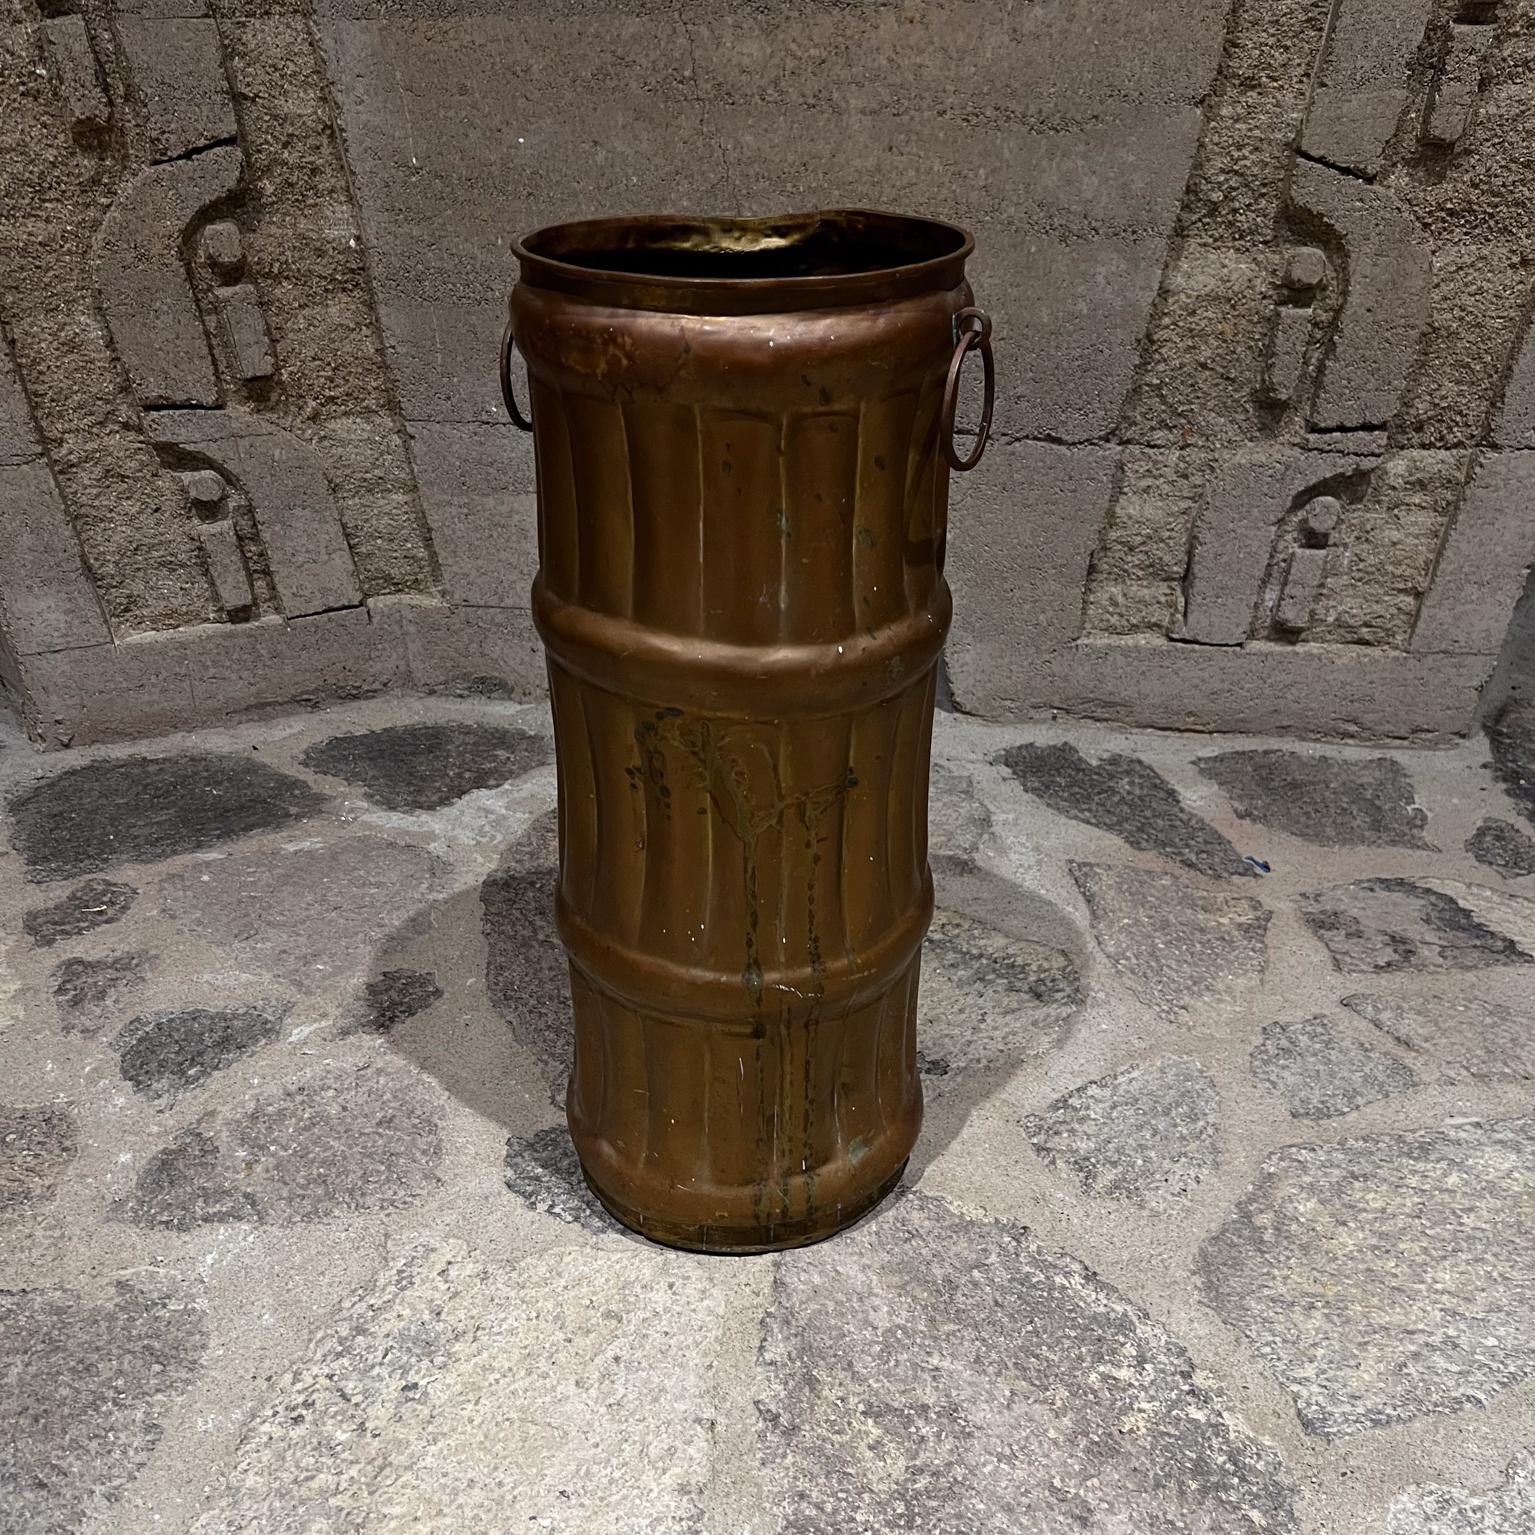 1940s French Umbrella Stand Solid Brass Faux Bamboo France
Crafted in Solid Brass with vintage patina.
Faux bamboo brass ring holder at side.
In the manner of Mathieu Matégot.
No markings
19.5 h x 7.75 diameter x 9 w
Original fair vintage unrestored